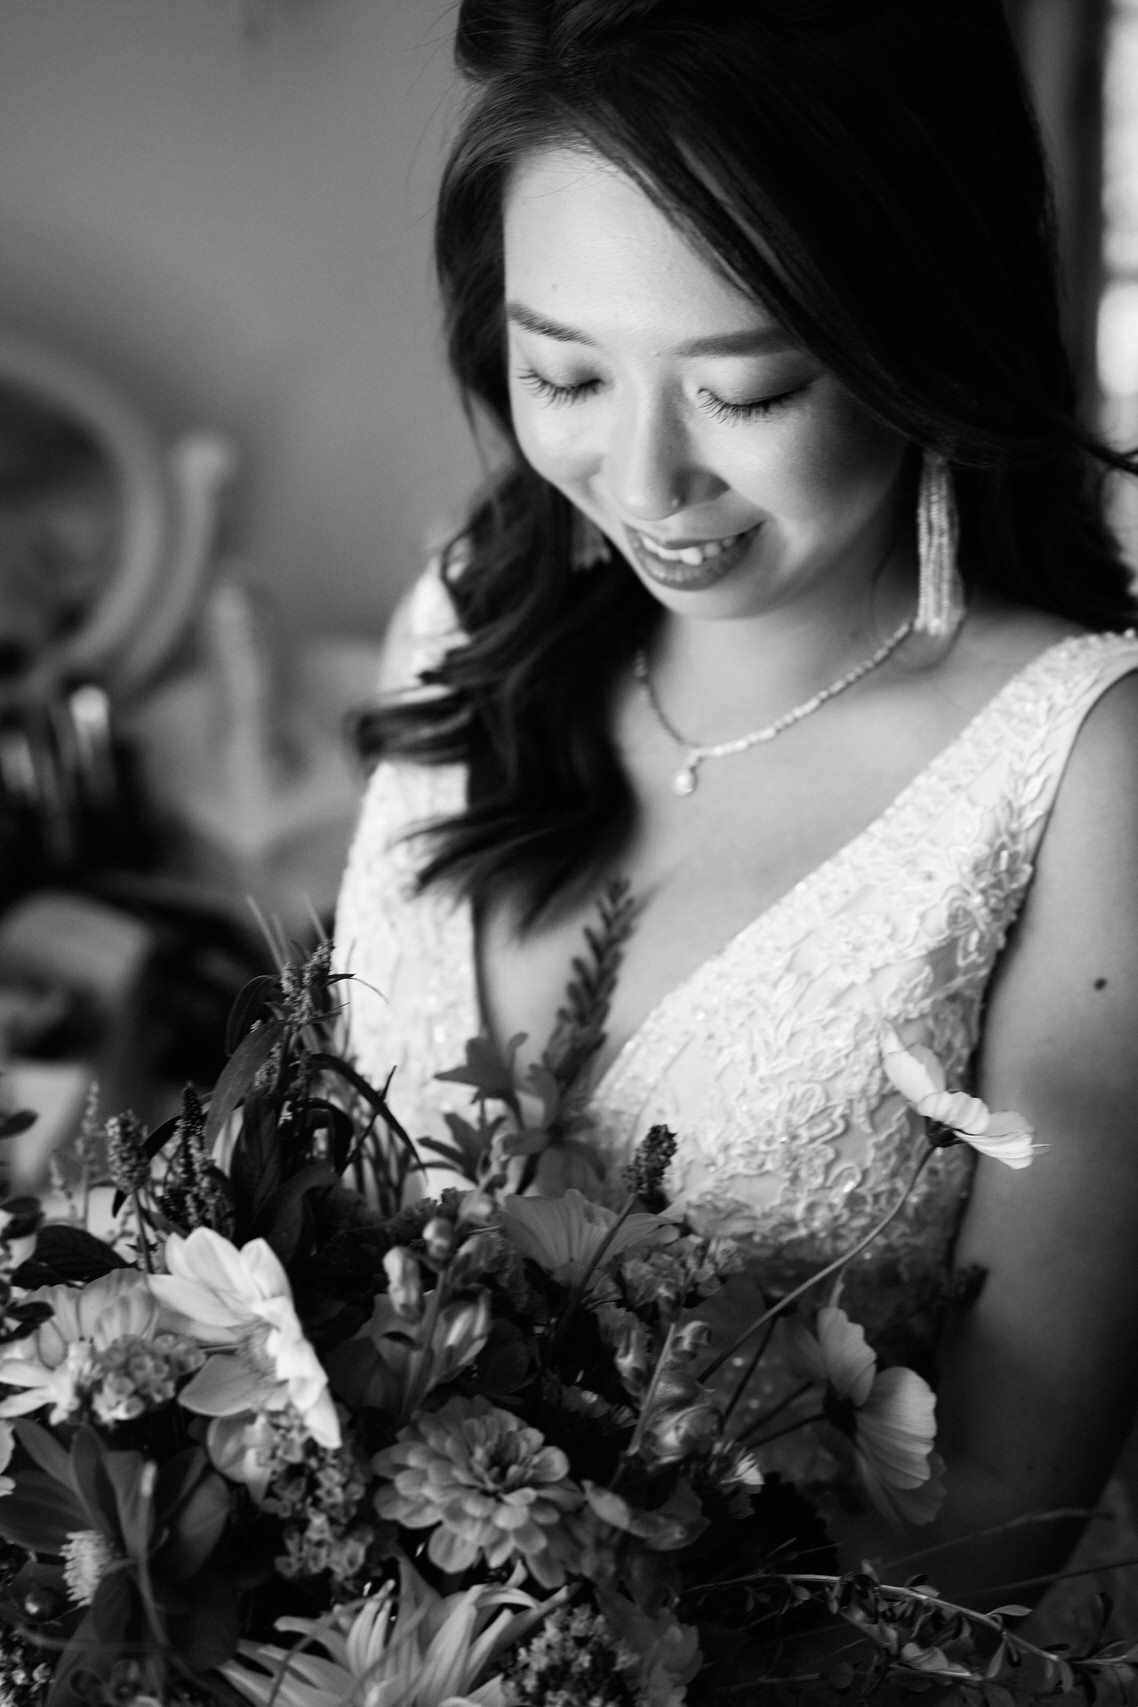 A black and white picture of a bride with her flower arrangement.